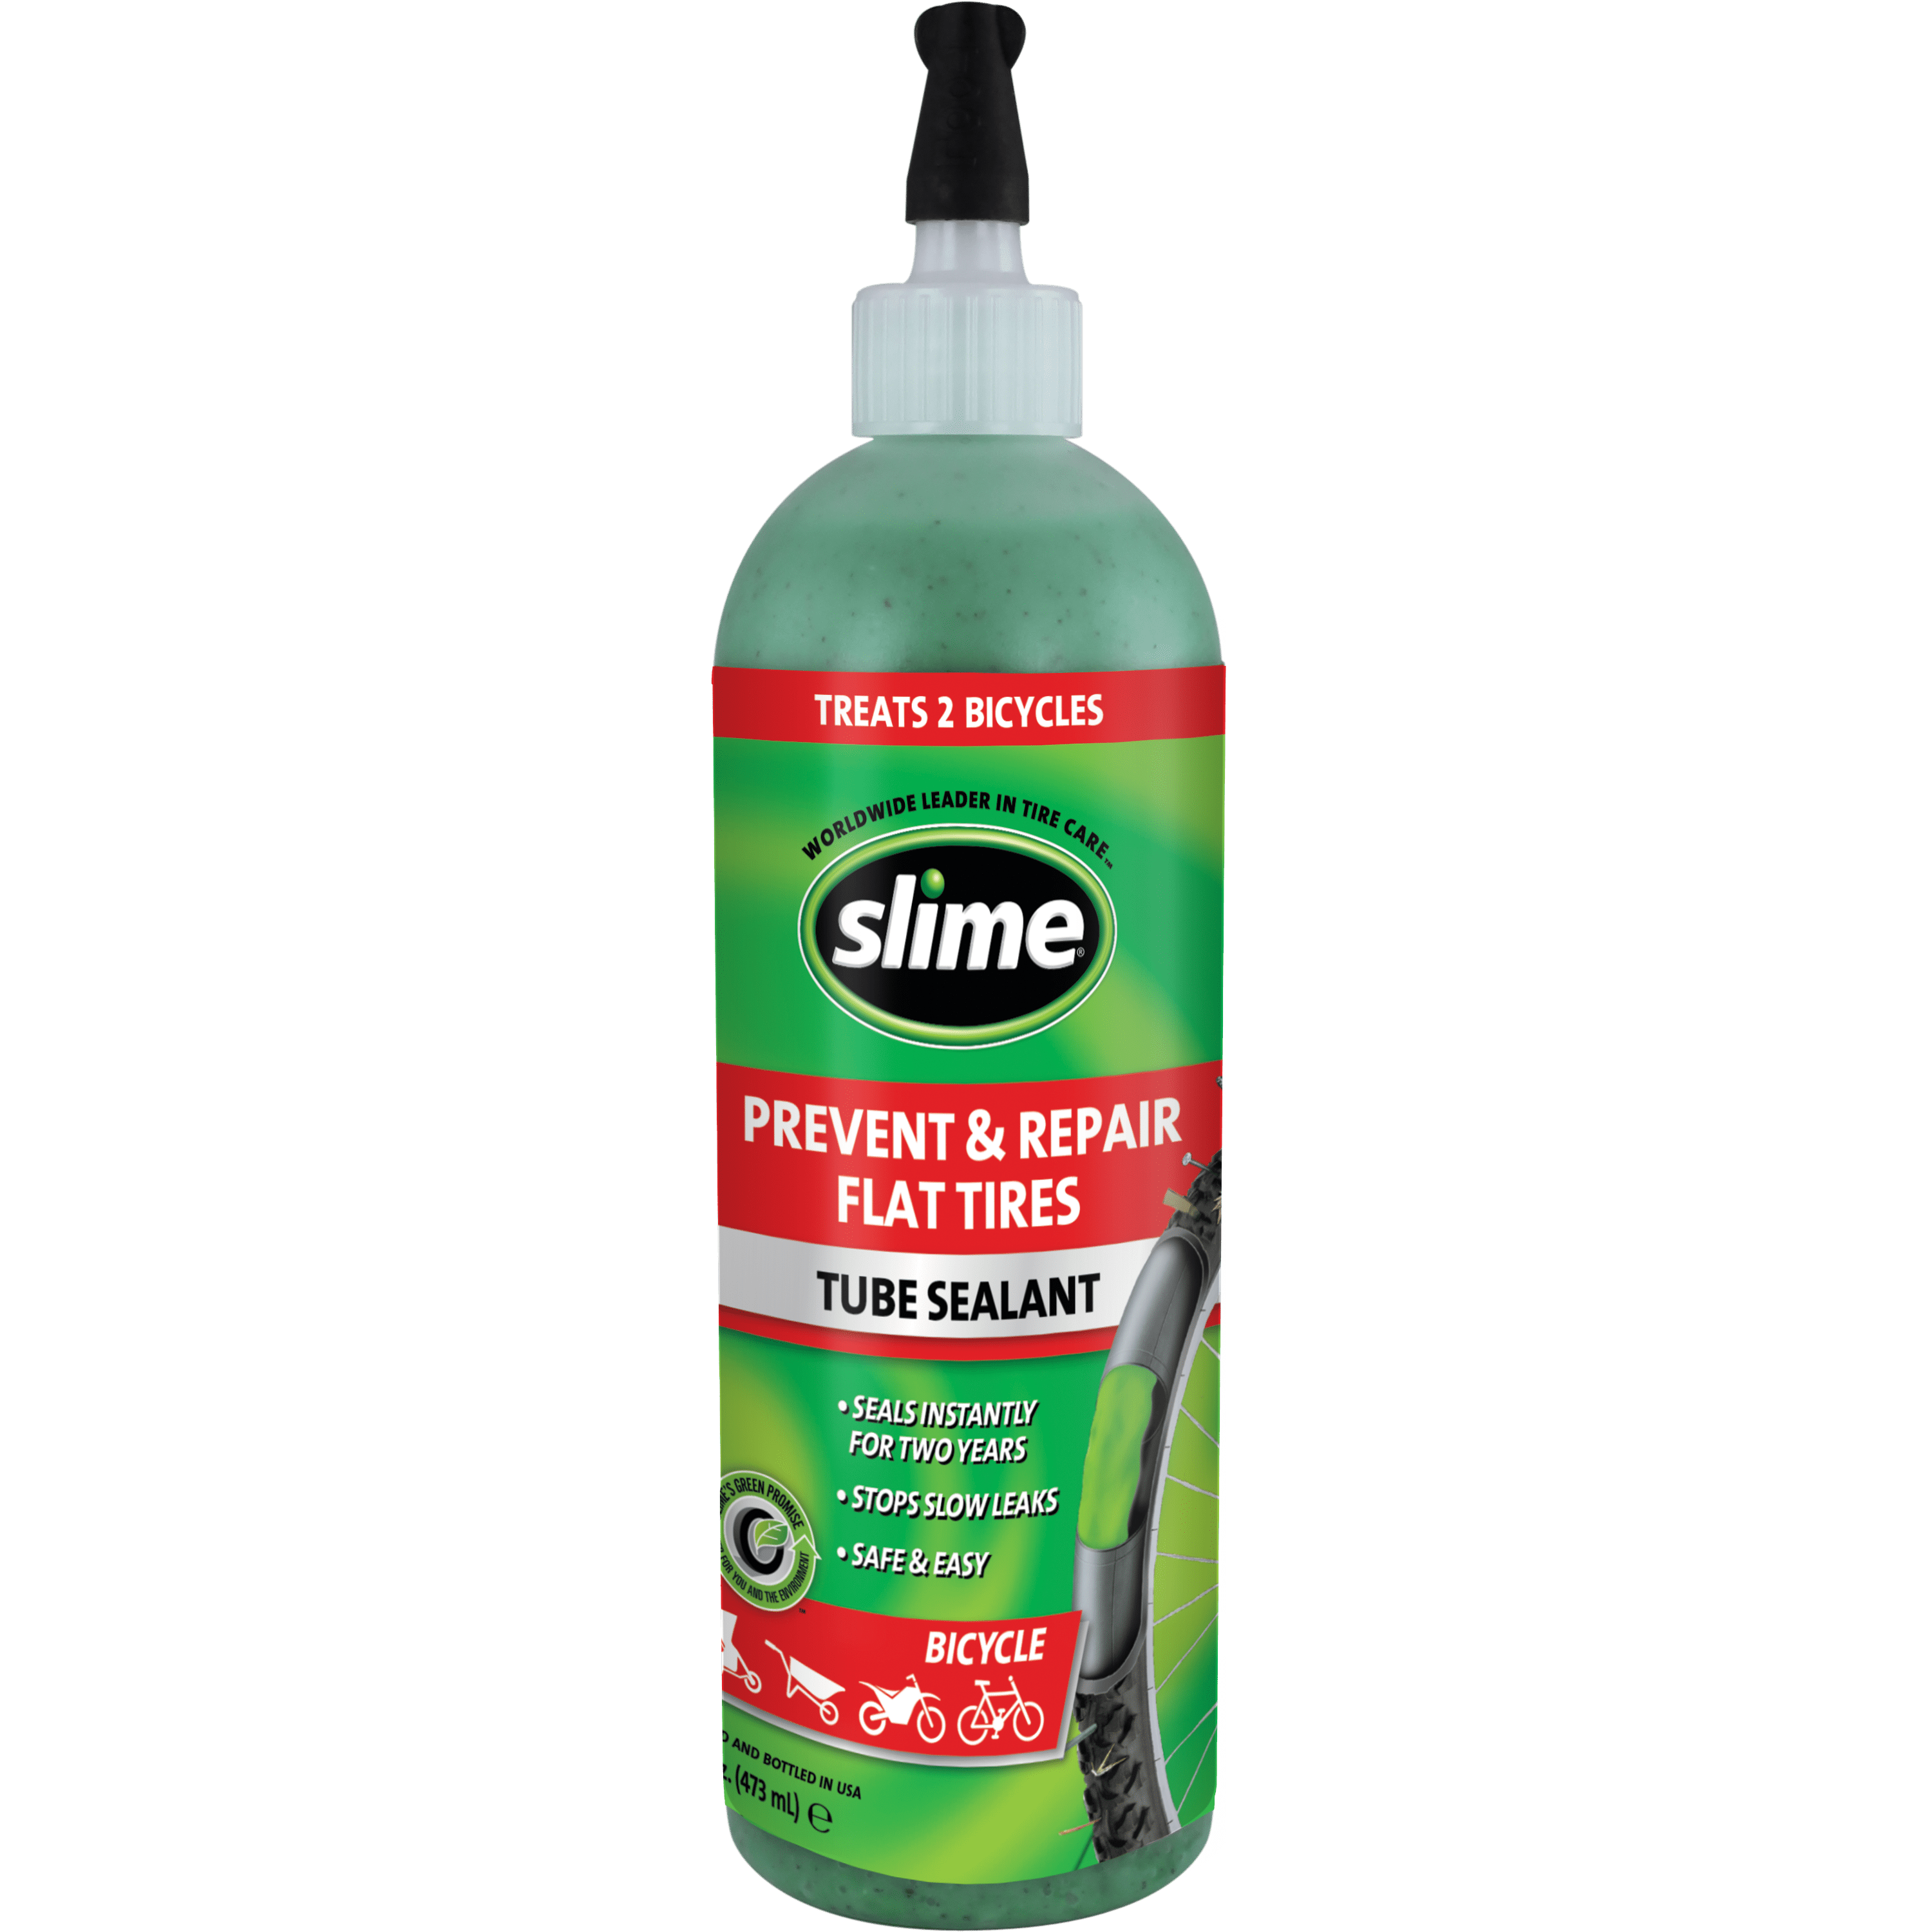 Slime Tube Sealant Prevent and Repair Flat Tires 16oz (Treats 2 Bicycles) - 10056W